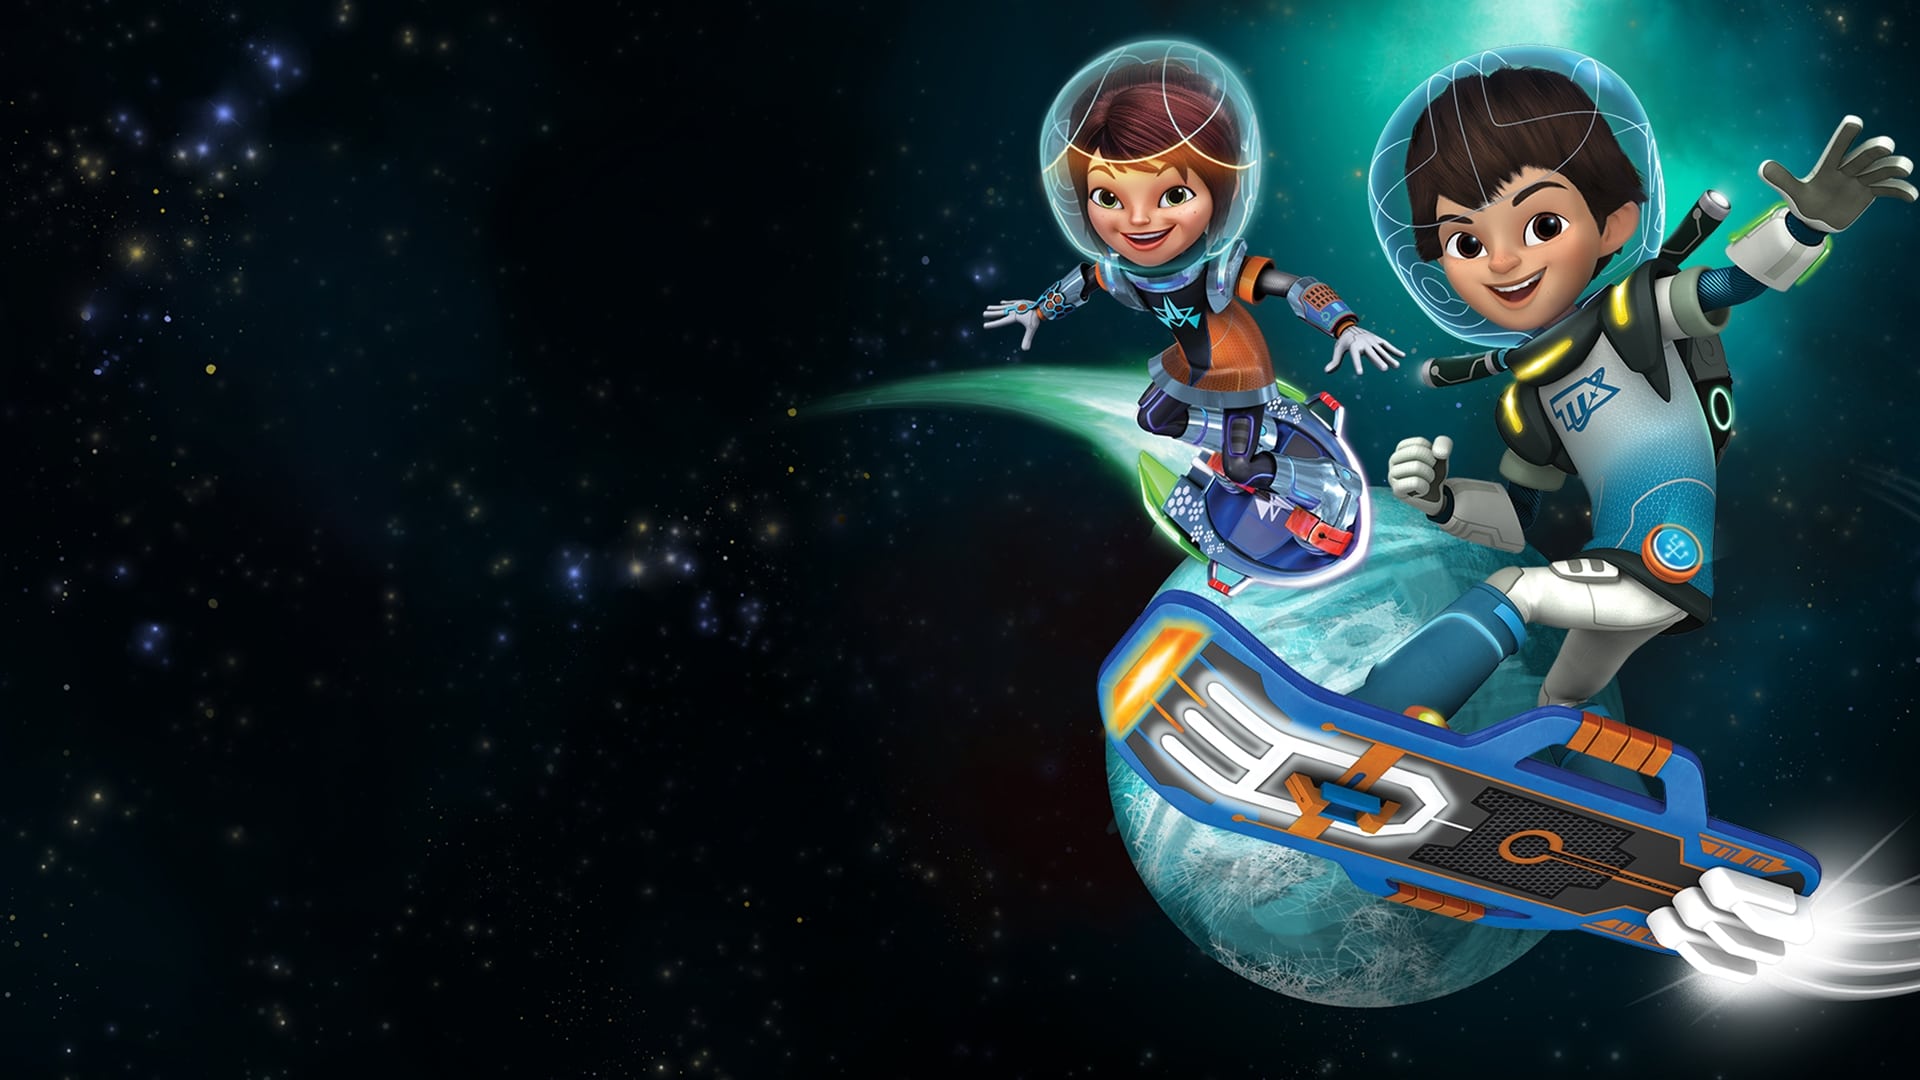 Miles From Tomorrowland Wallpapers